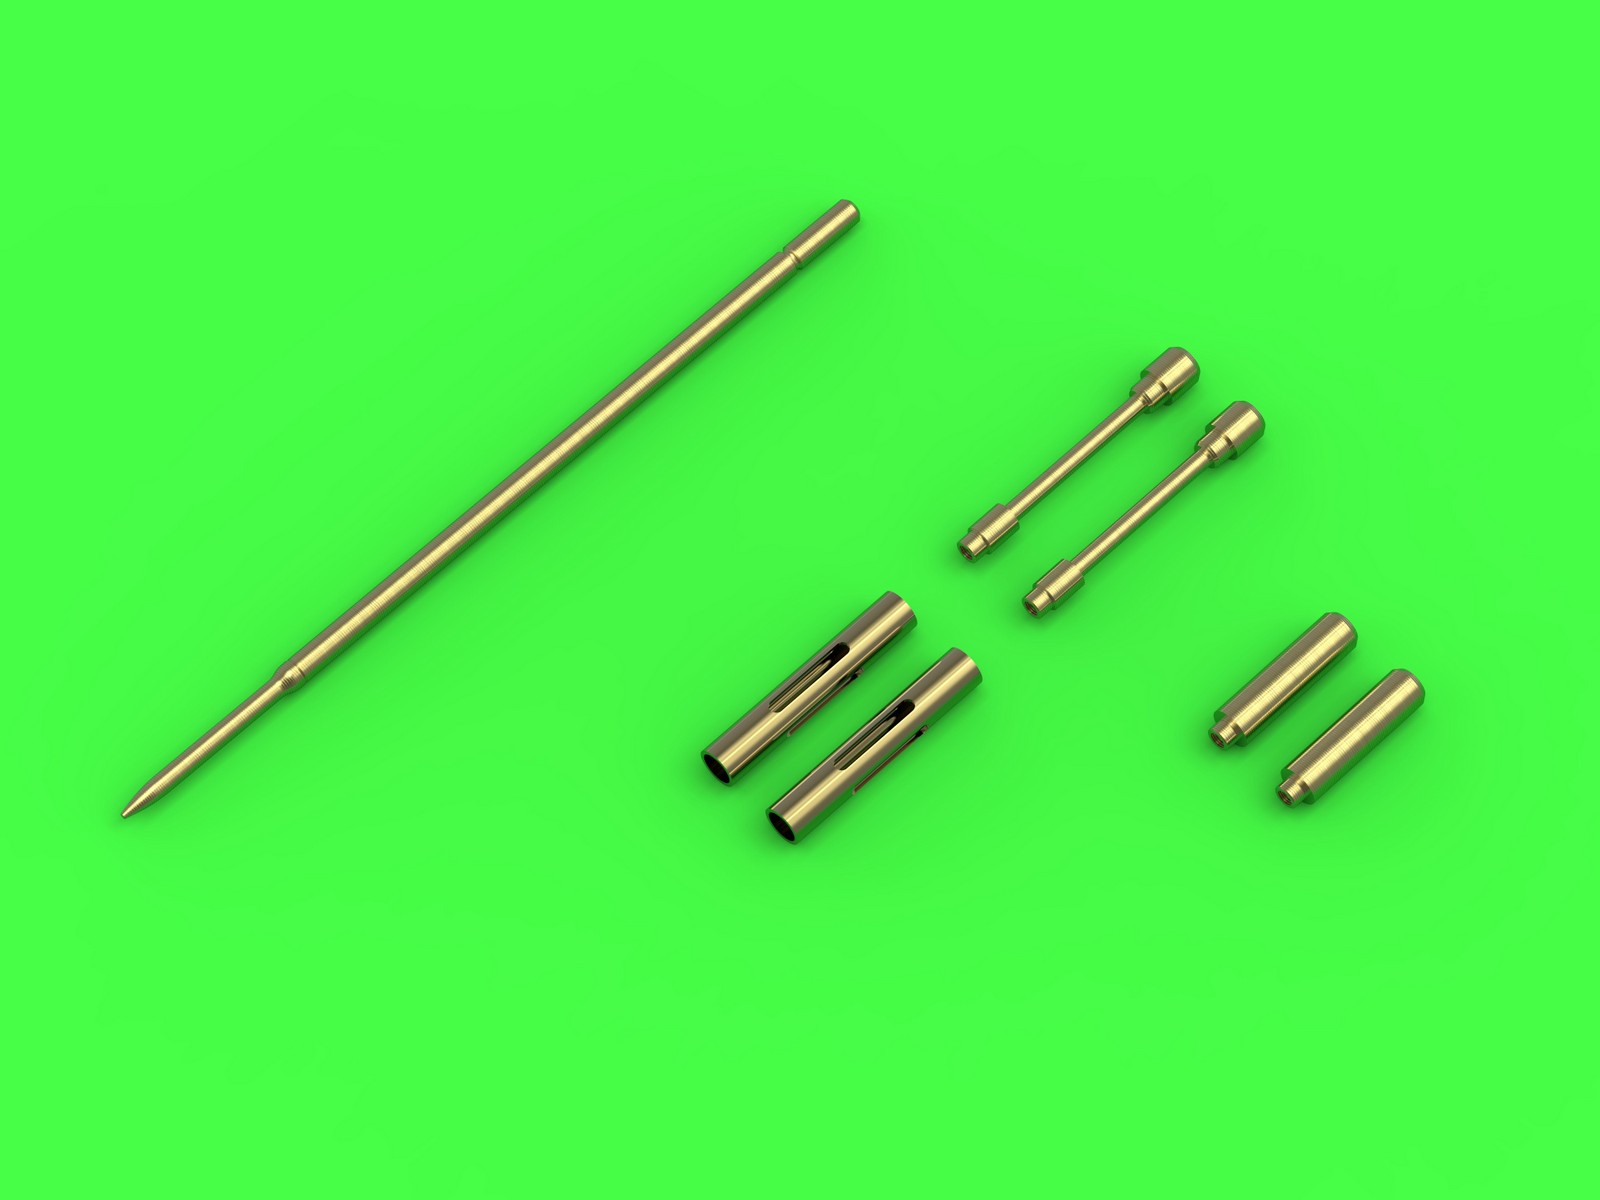 Aircraft detailing sets (brass) 1/48 Grumman F4F-3 Wildcat EARLY (pre-war) - .50 Browning gun barrels with oblong holes & early Pitot Tube